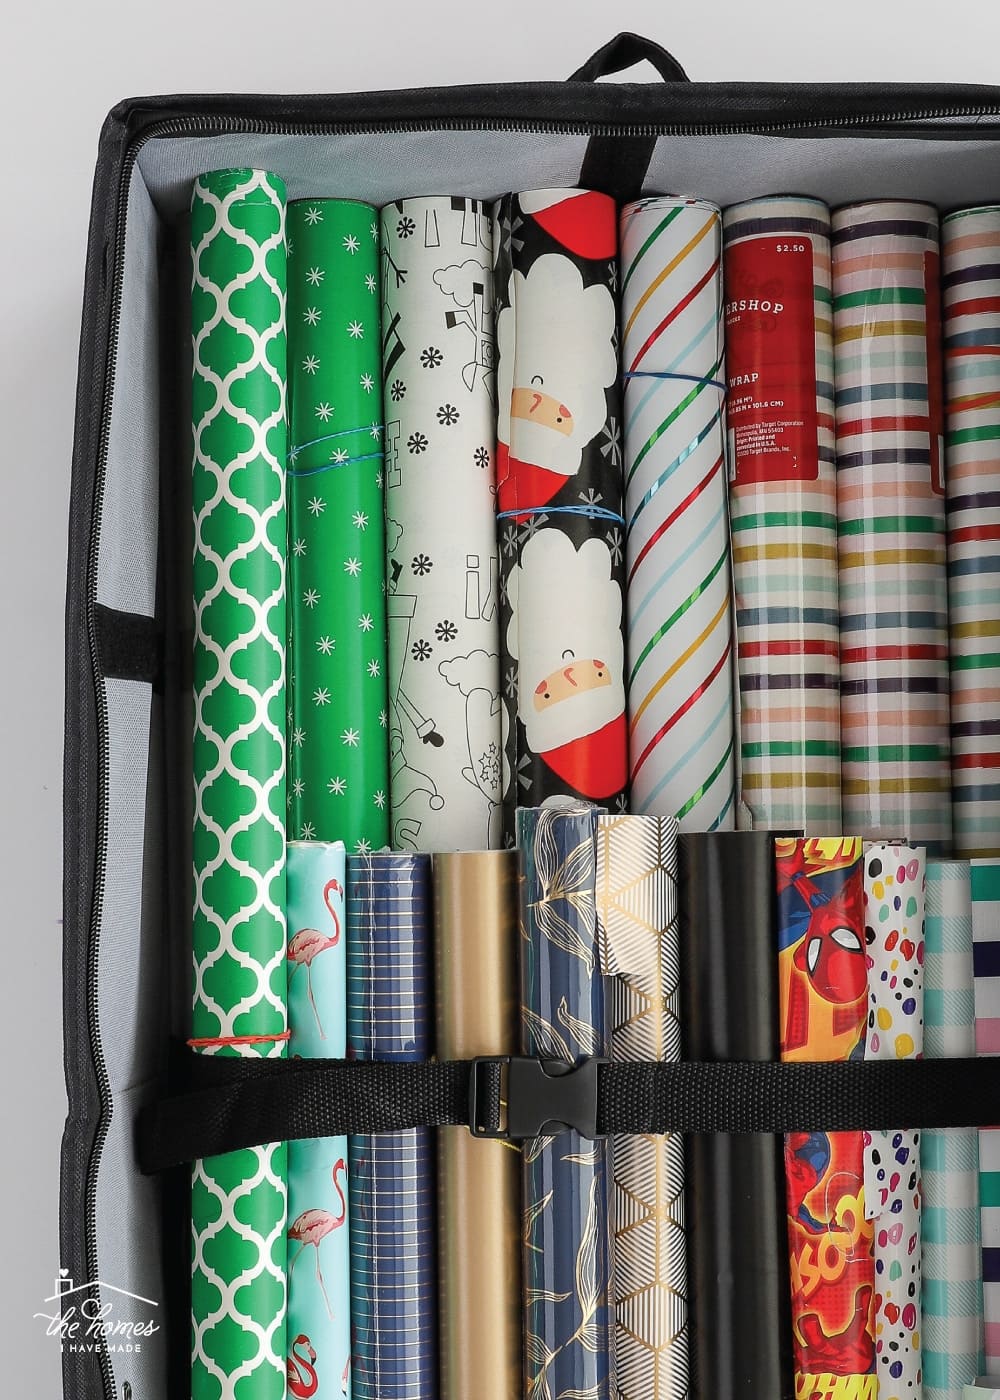 Get Your Wrapping Paper Out of the Way With These Easy Storage